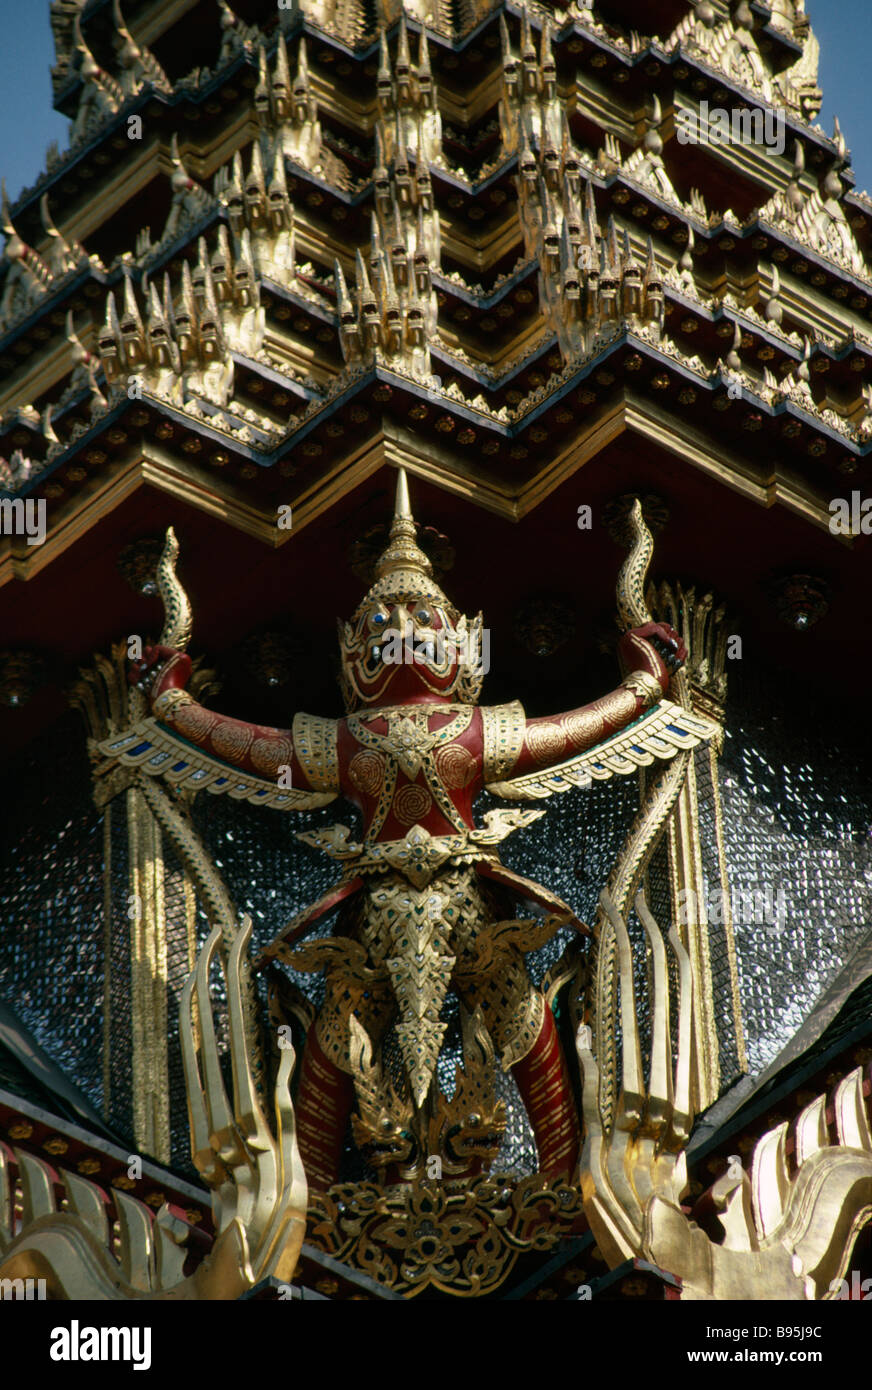 THAILAND Bangkok Grand Royal Palace detail of elaborate gilded roof with winged carved figure Stock Photo